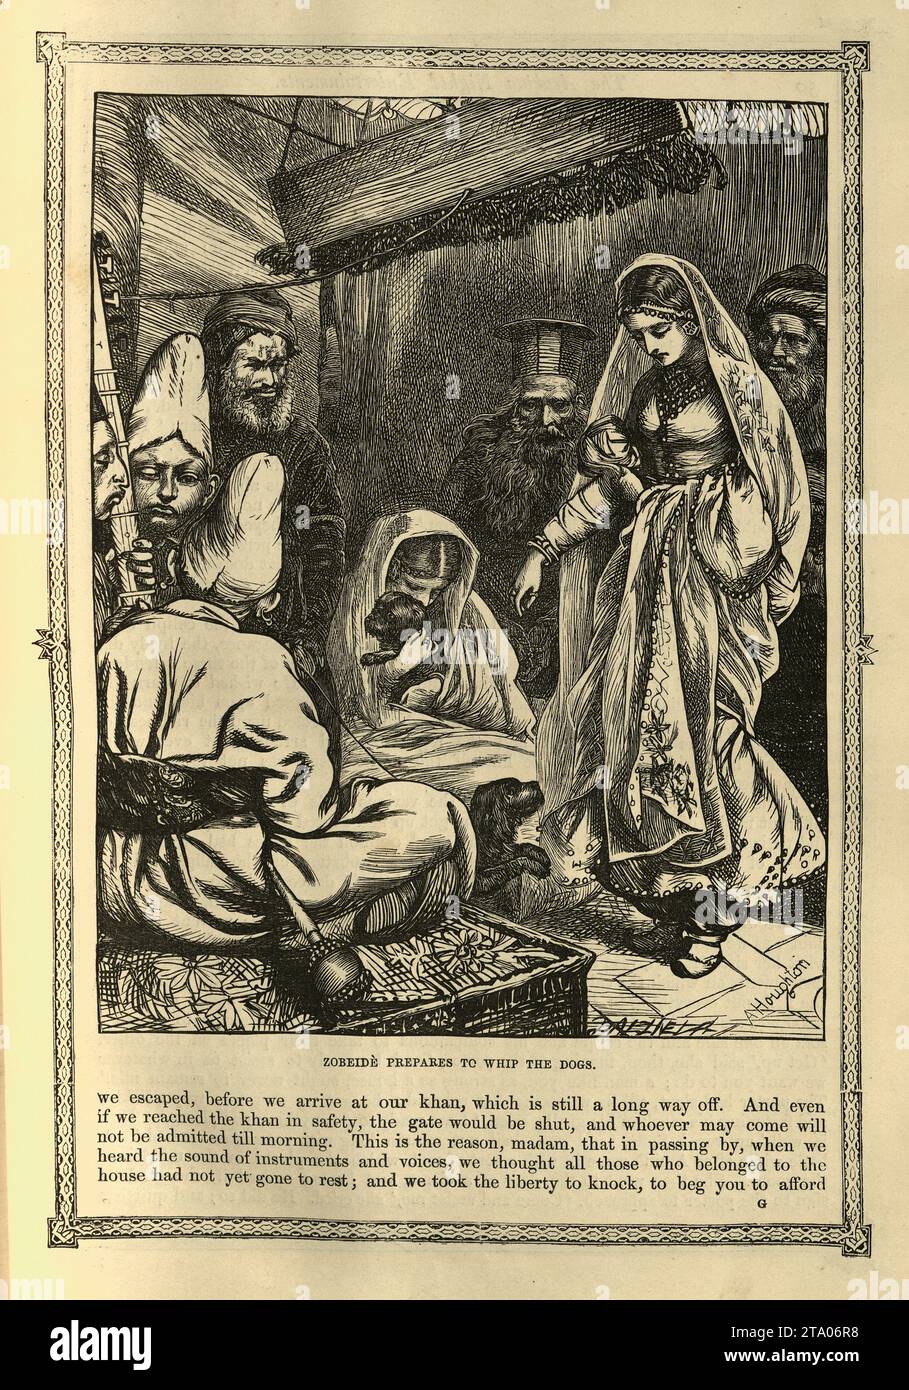 Vintage illustration One Thousand and One Nights, Zobeide preares to whip the dogs, Arabian, Middle Eastern folktales, by The Brothers Dalziel. The Story of the Three Calenders, Sons of Kings, and of Five Ladies of Bagdad Stock Photo